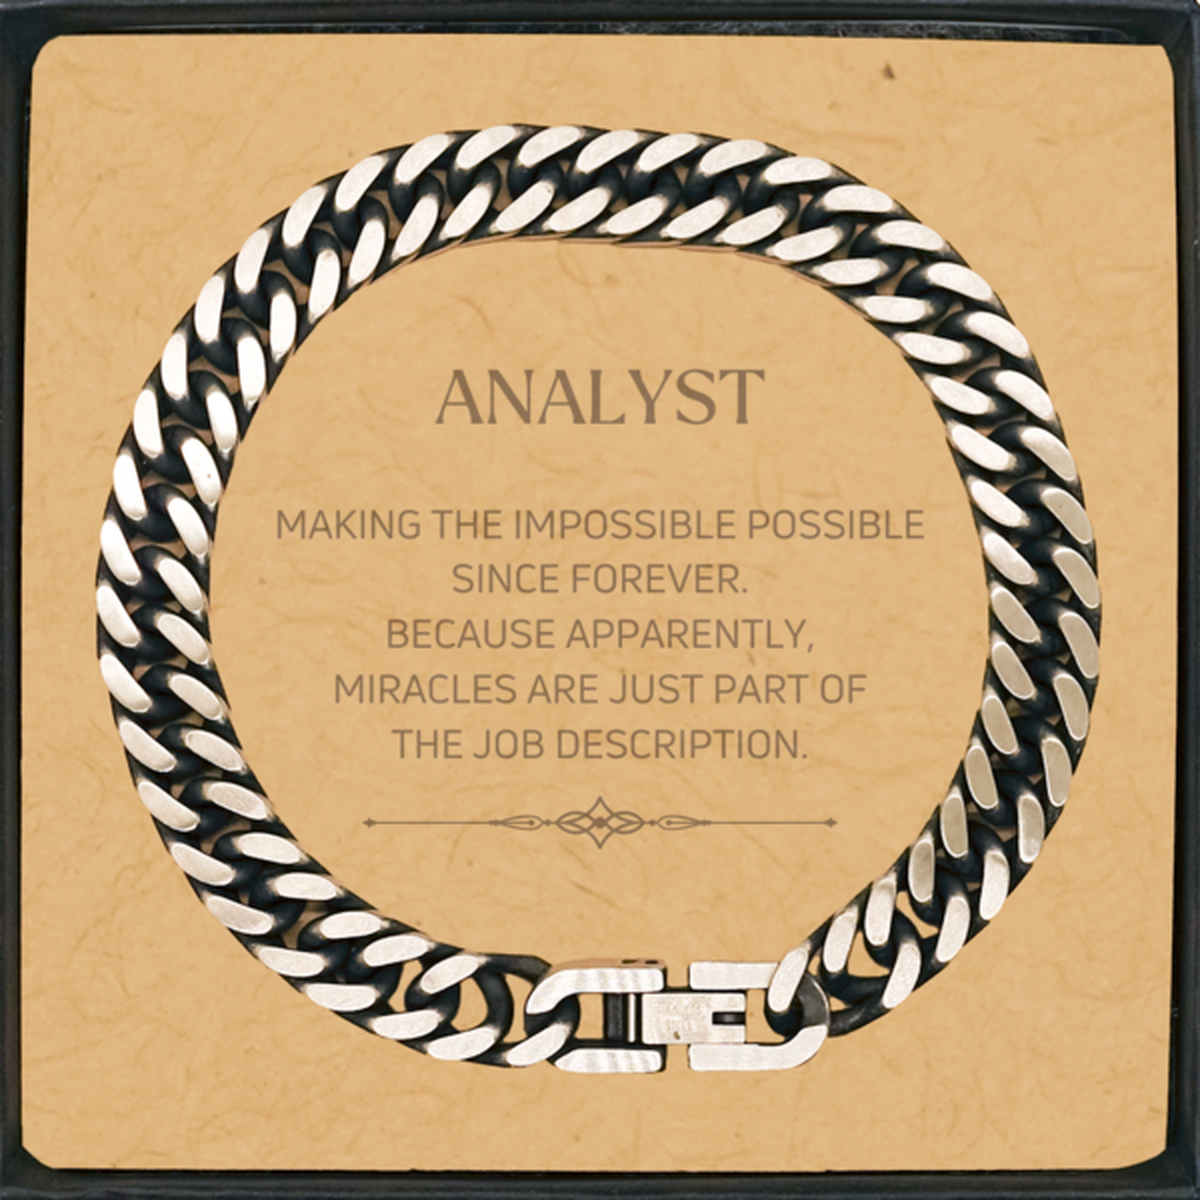 Funny Analyst Gifts, Miracles are just part of the job description, Inspirational Birthday Cuban Link Chain Bracelet For Analyst, Men, Women, Coworkers, Friends, Boss